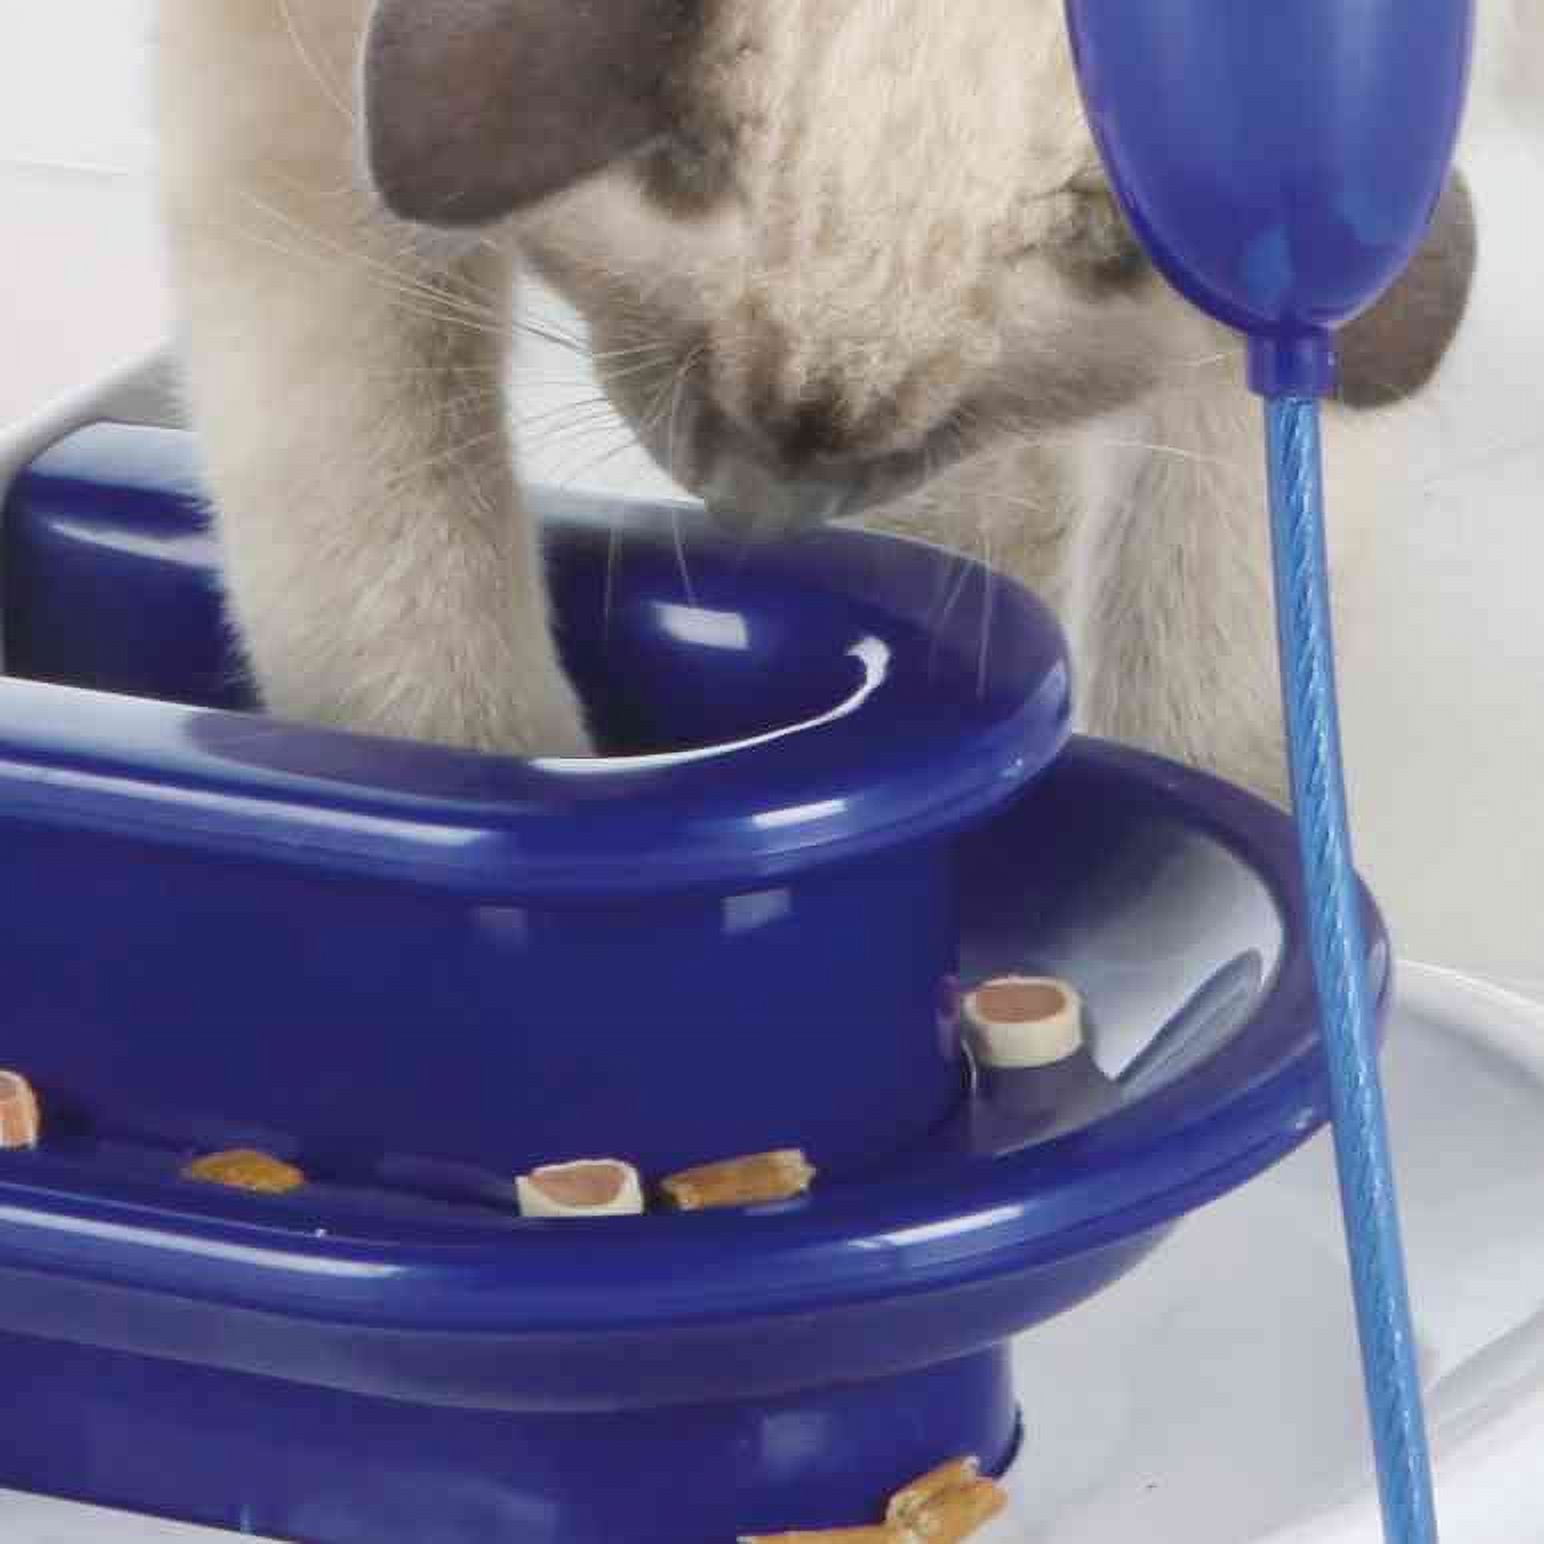 Trixie Activity Flip Board is a Fun Puzzle Toy for Cats - Patience for Cats